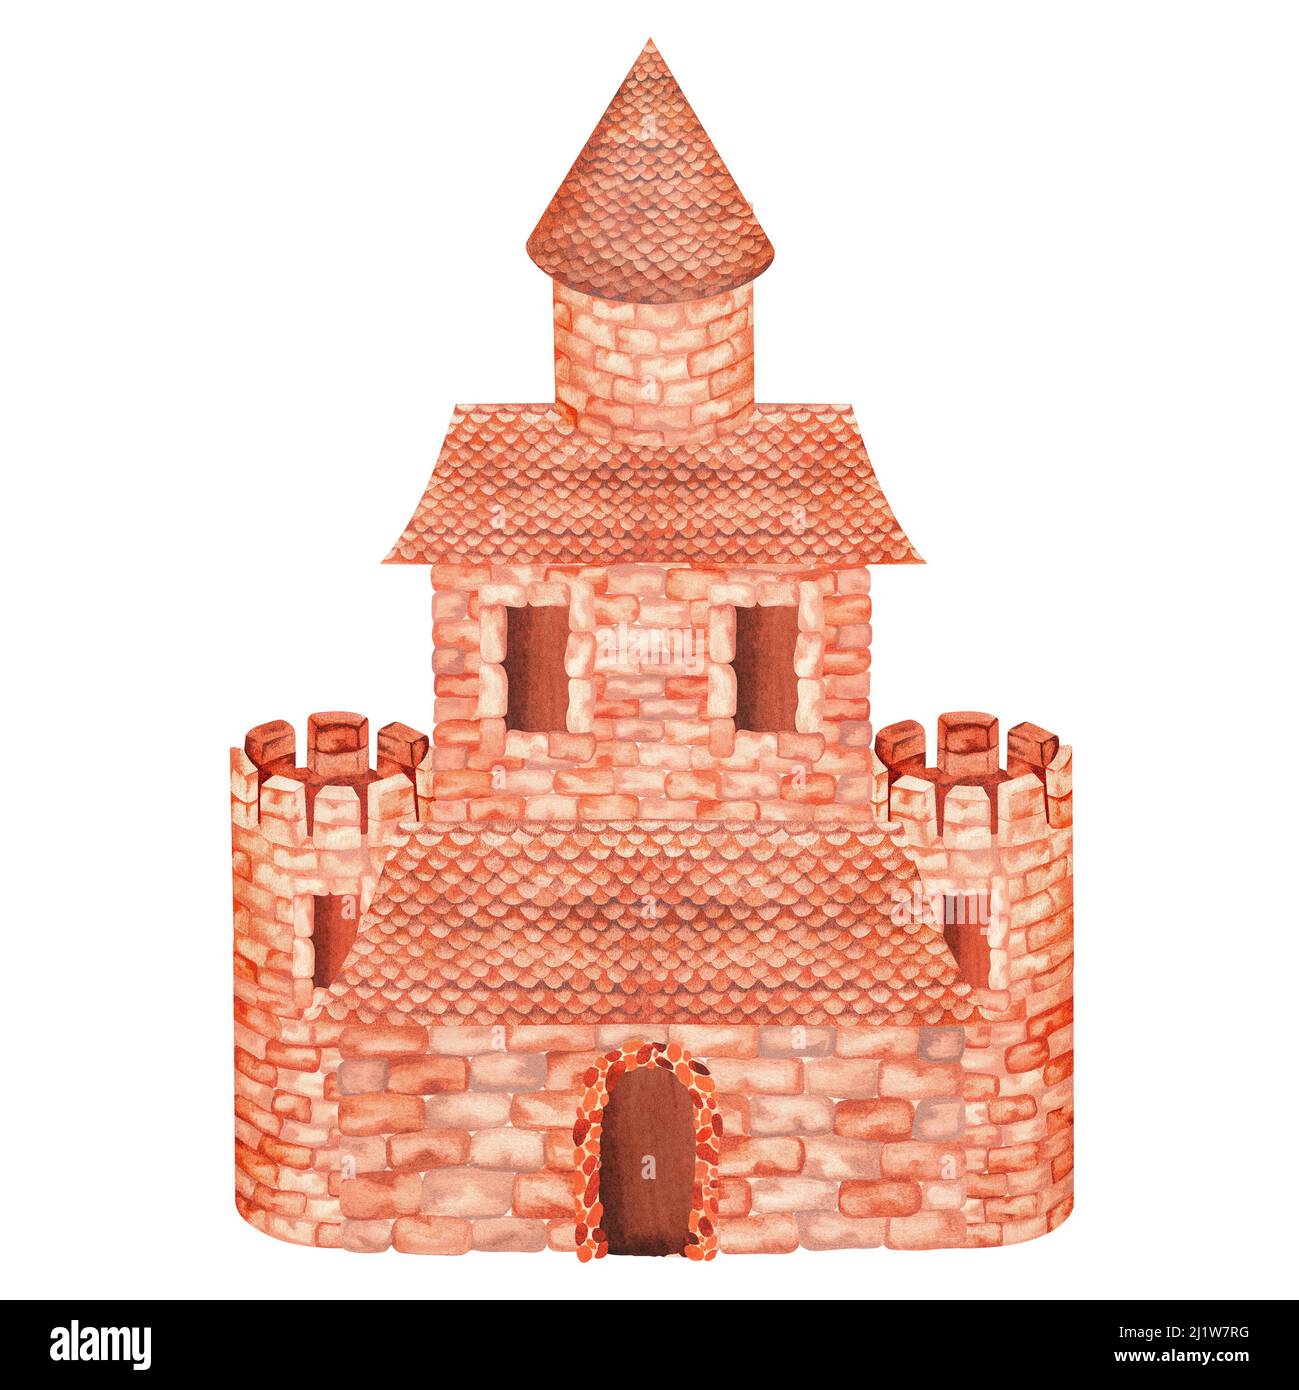 Brick castle with an observation tower. Watercolor illustration. Isolated on a white background. For your design of nursery interior items, stationery Stock Photo